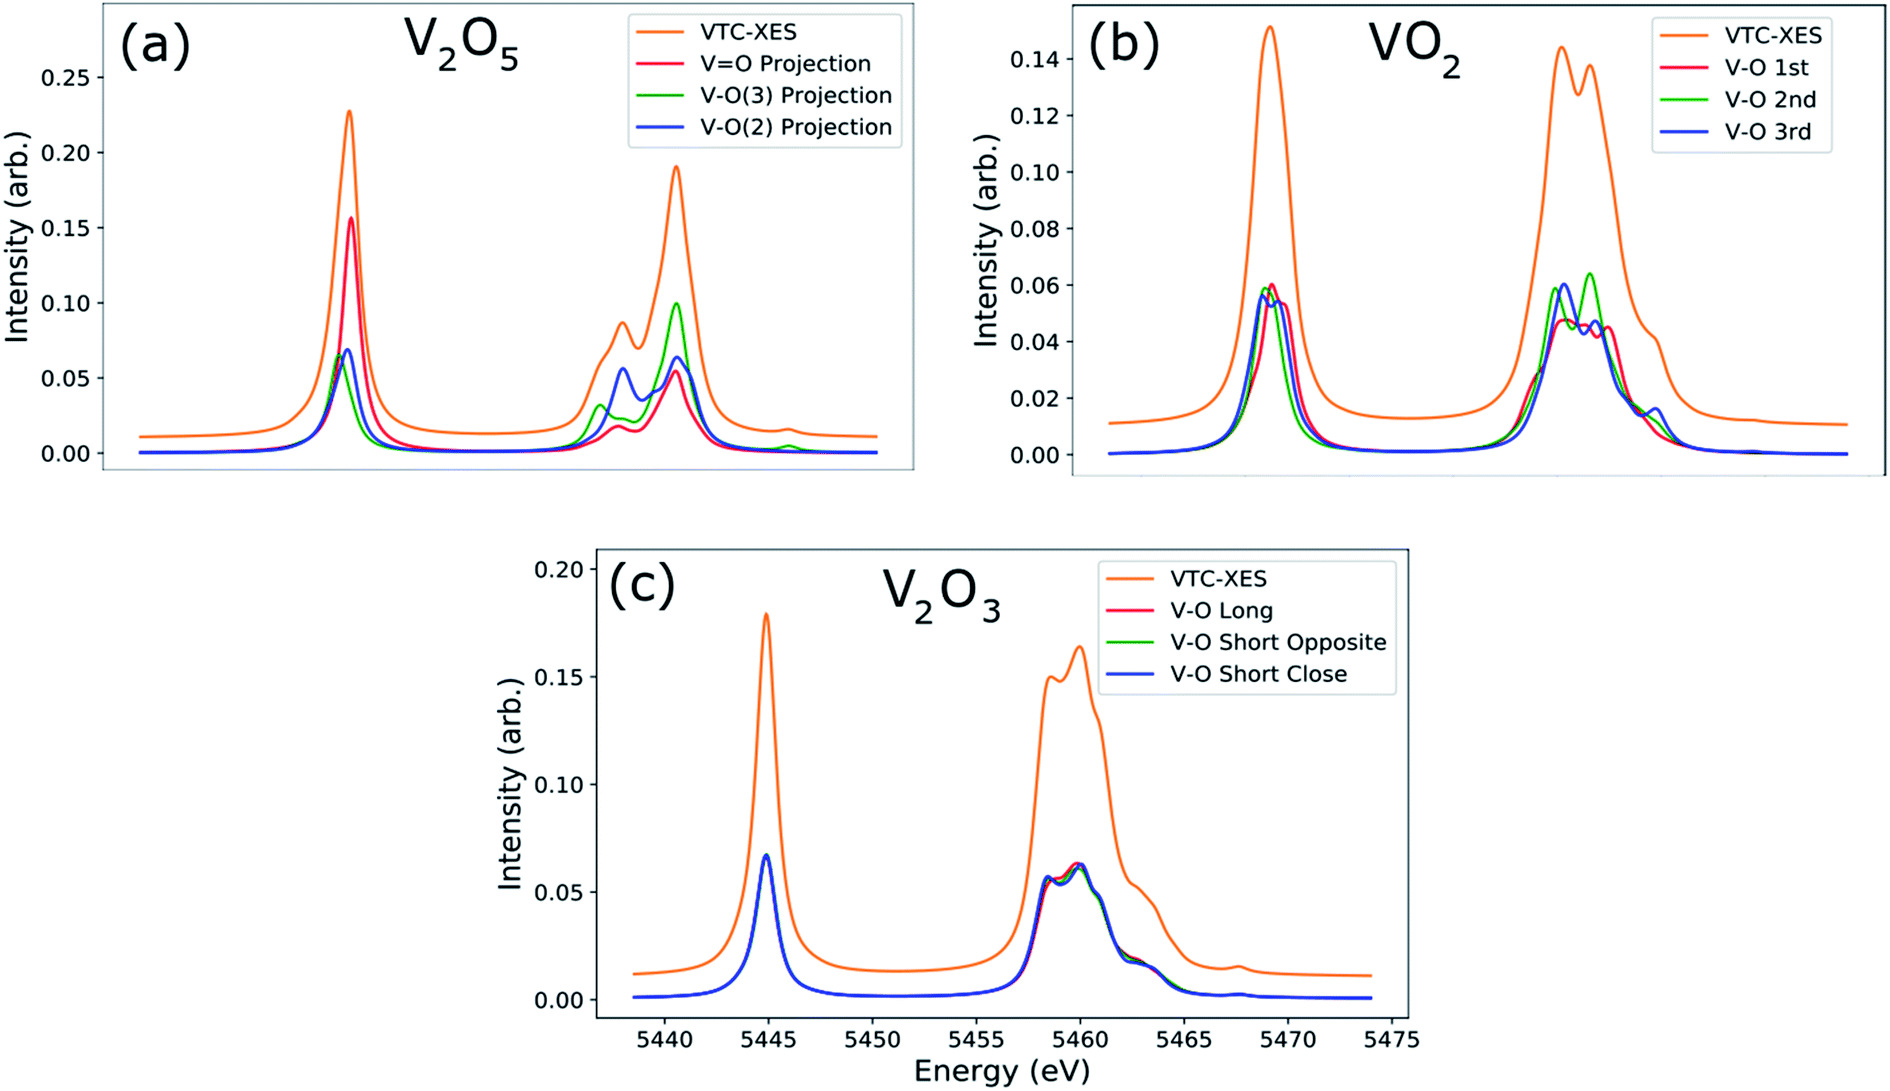 Valence To Core X Ray Emission Spectroscopy Of Vanadium Oxide And Lithiated Vanadyl Phosphate Materials Journal Of Materials Chemistry A Rsc Publishing